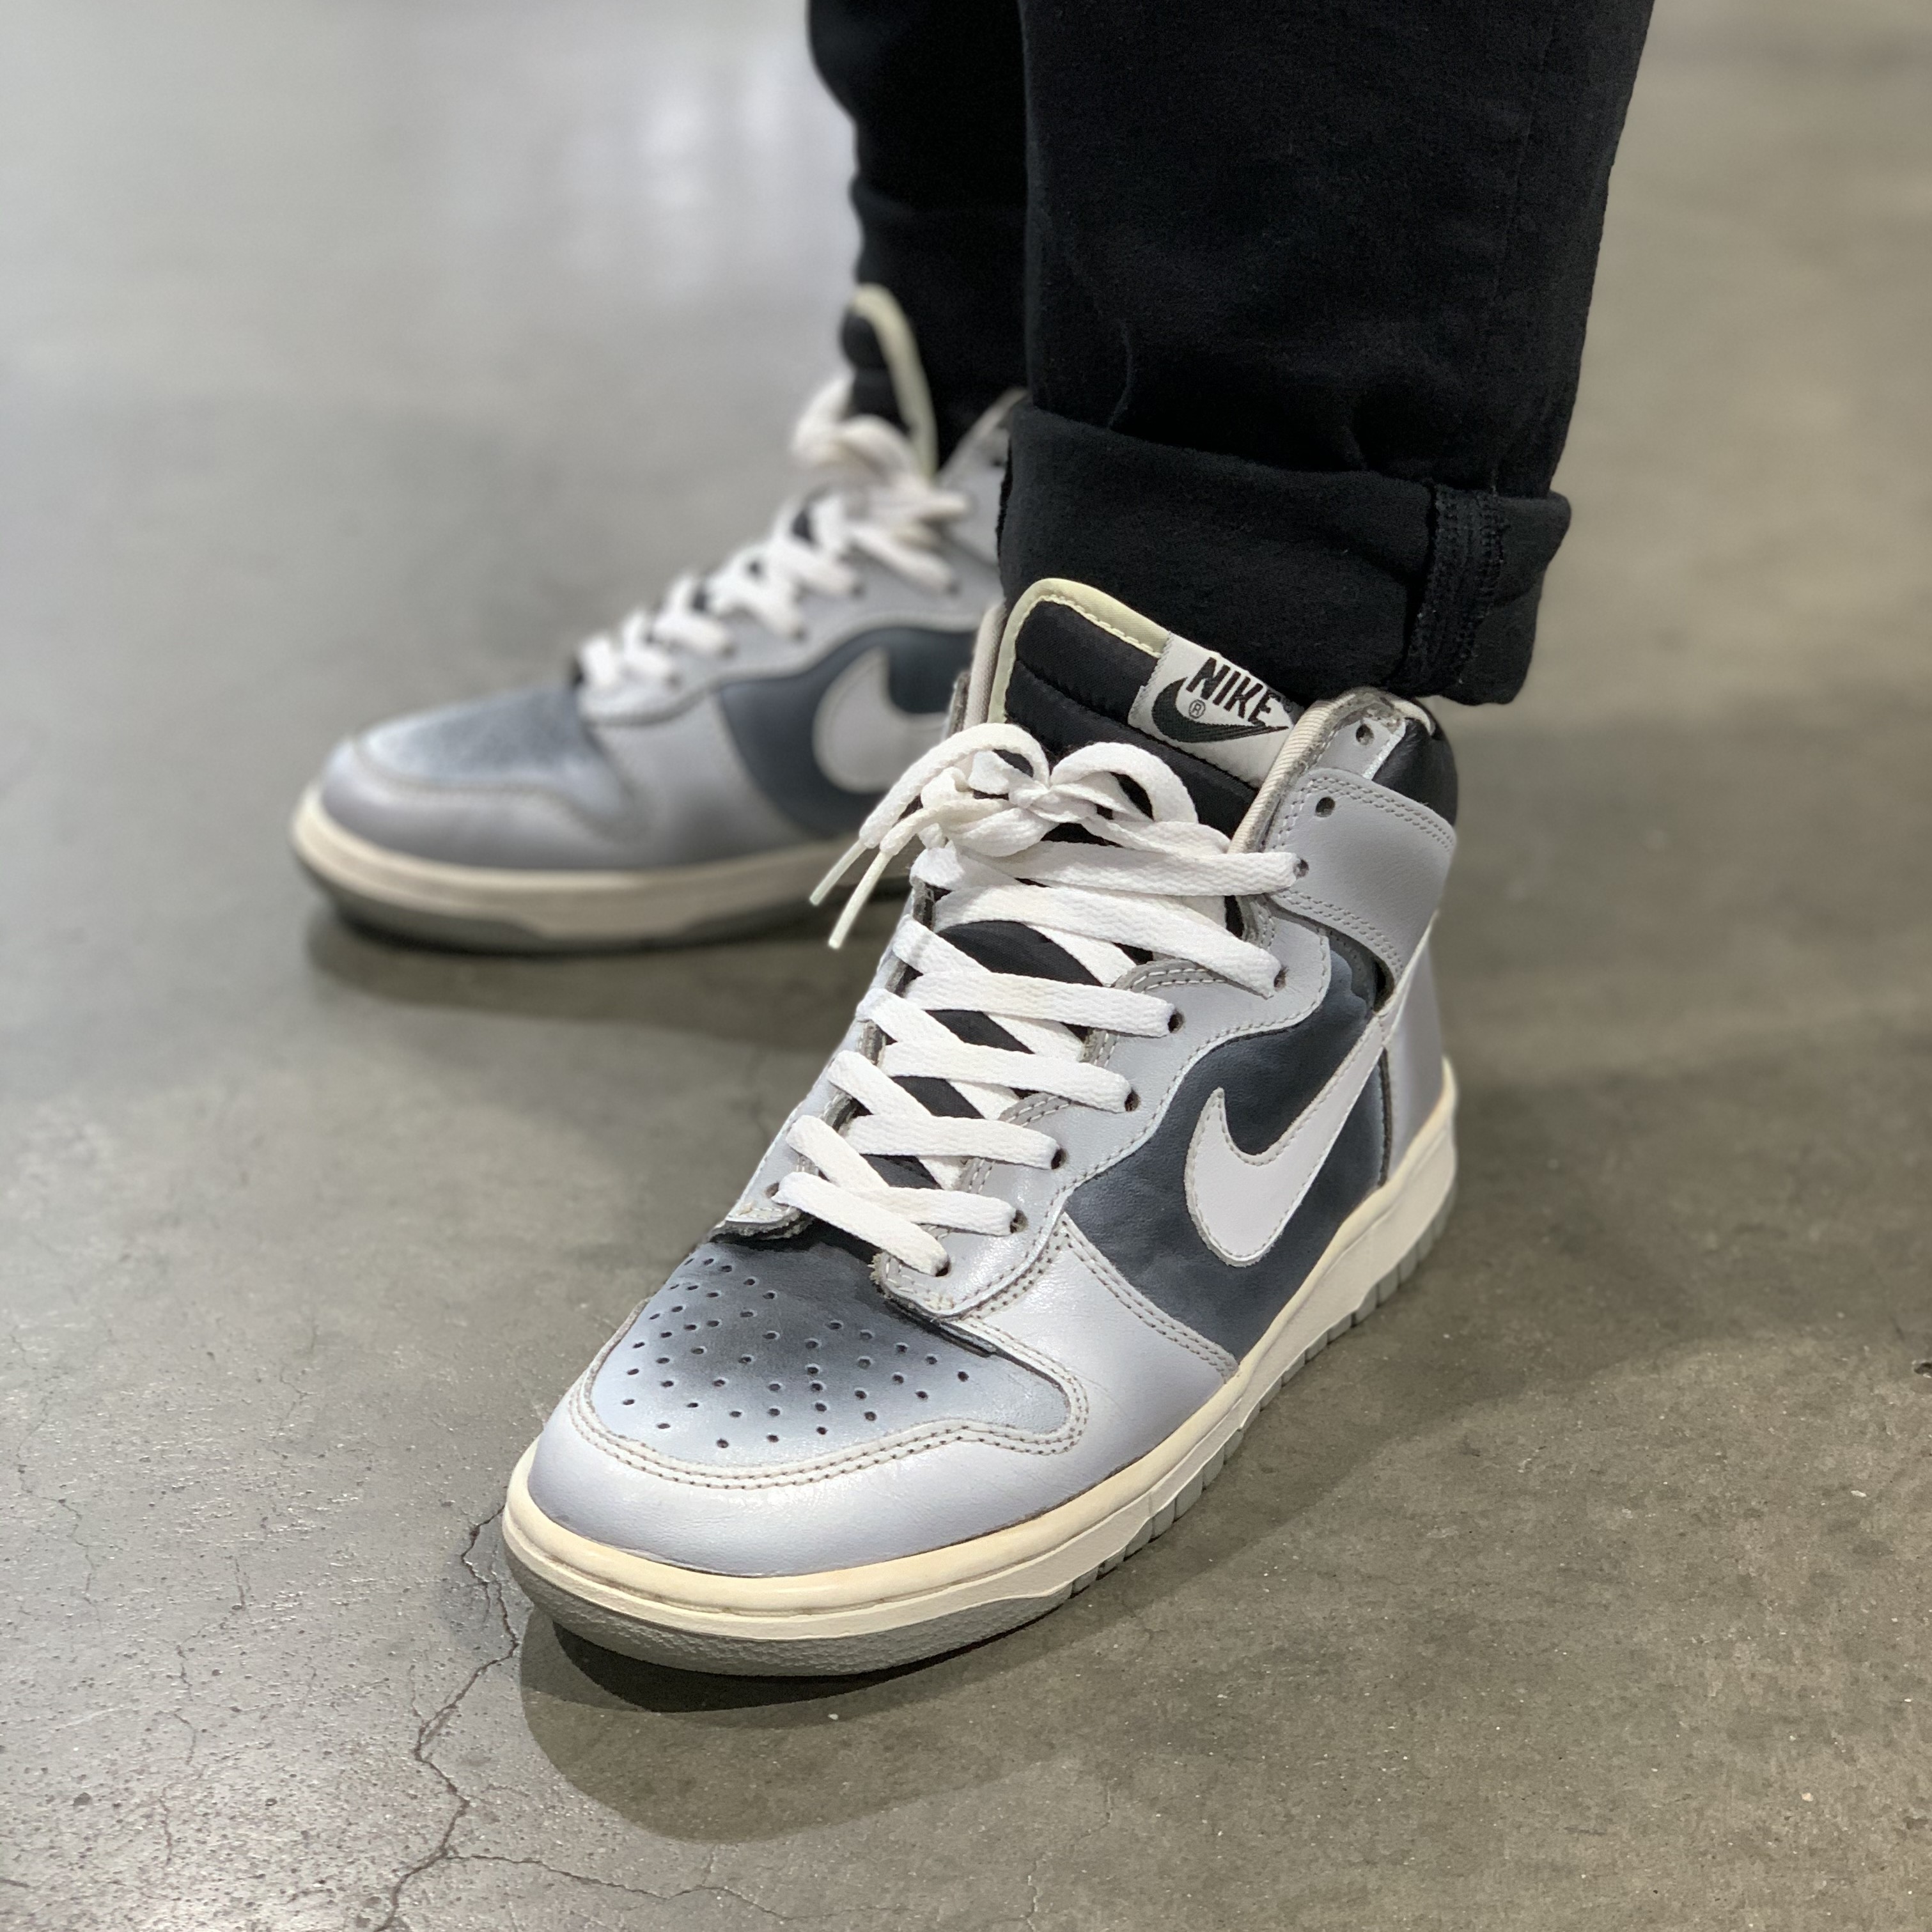 Best Sneakers at ComplexCon 2019 Haze x Nike Dunk High